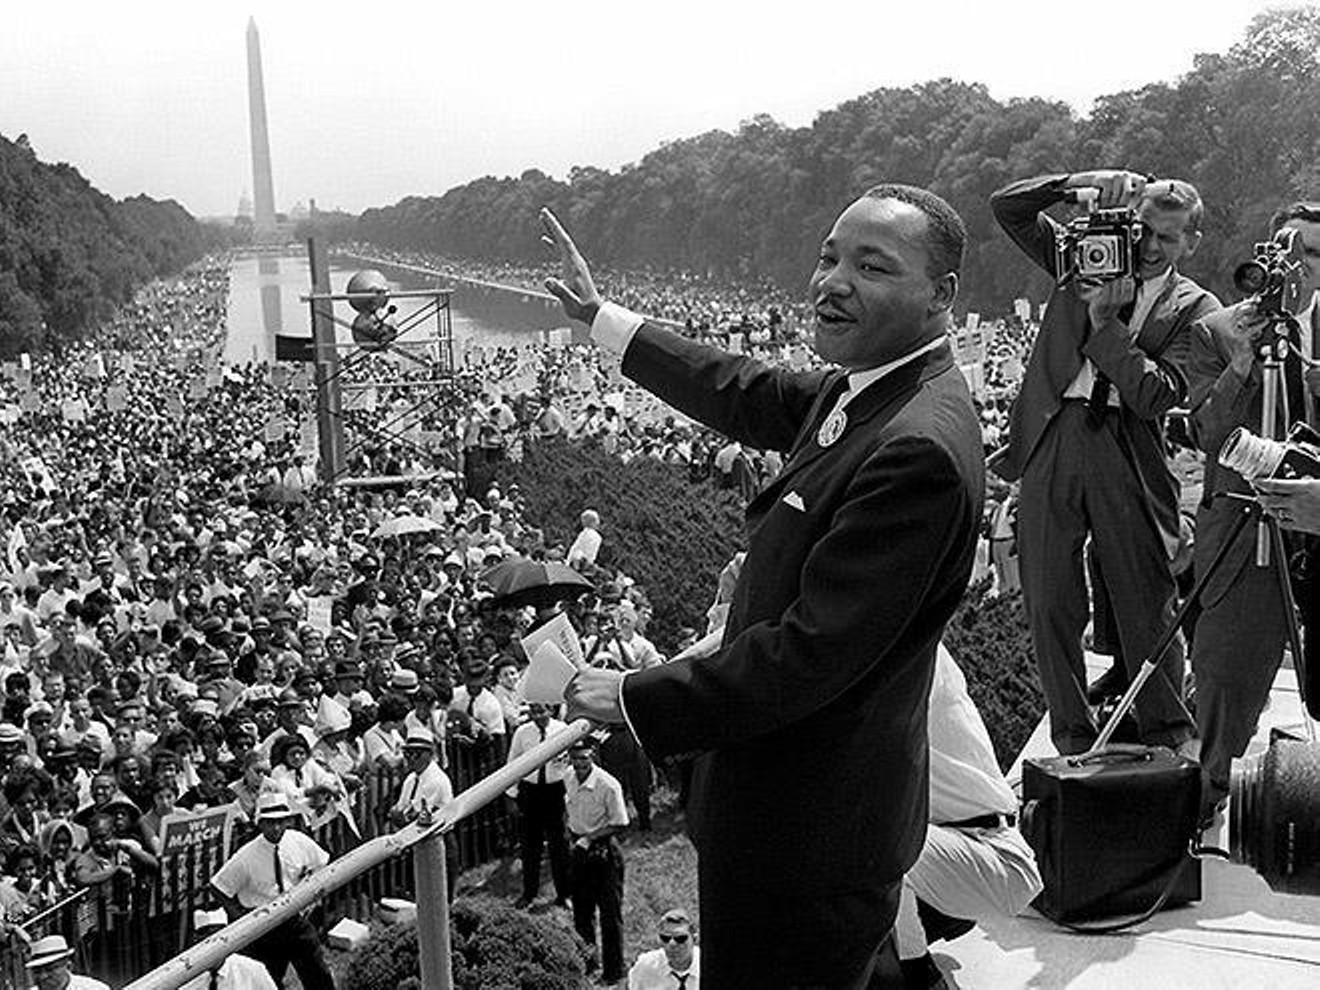 Martin Luther King gives his "I Have a Dream" speech in Washington, D.C., on August 28, 1963.